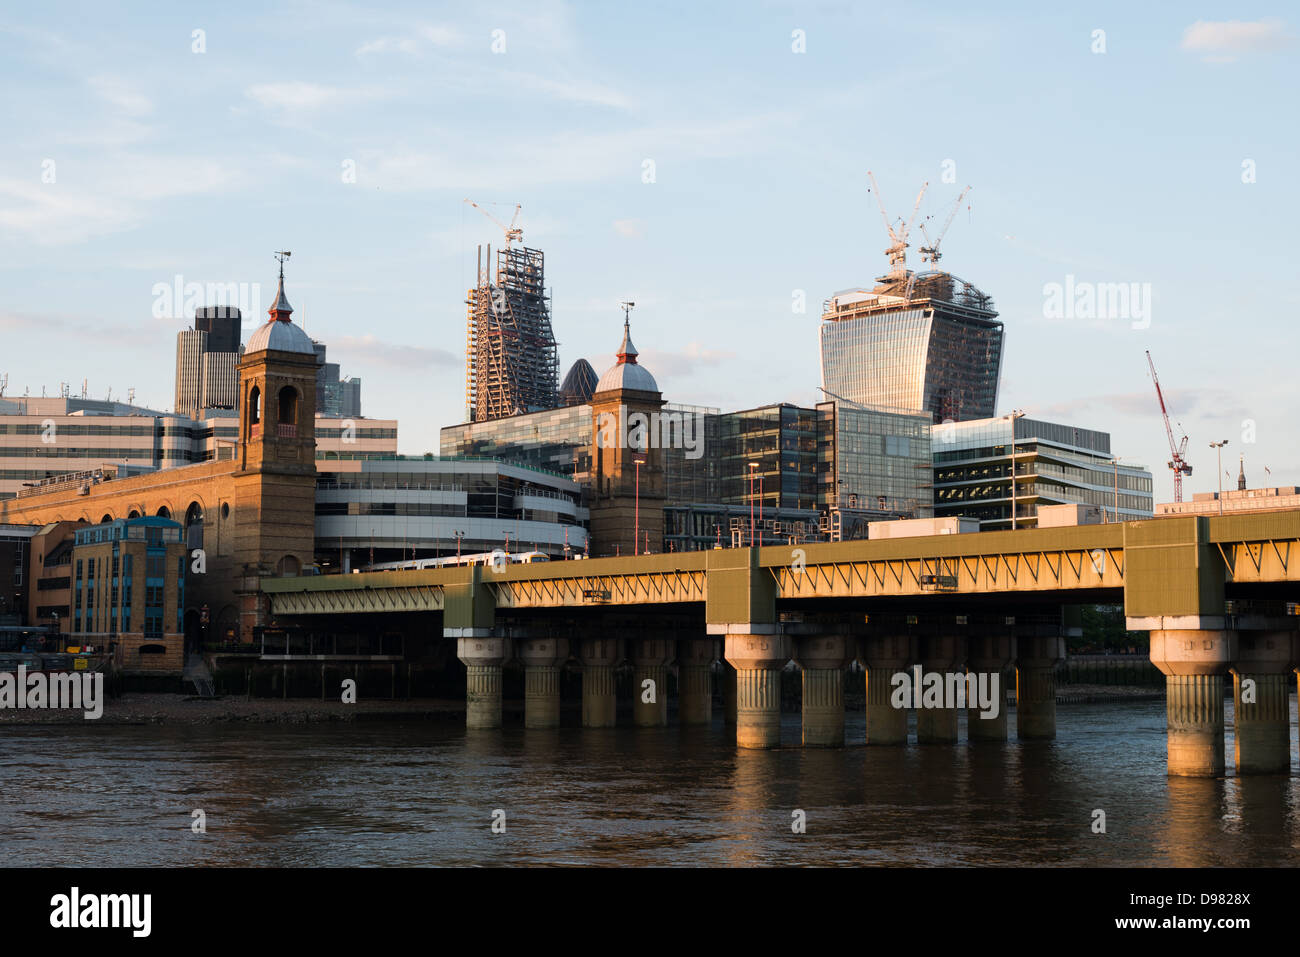 LONDON, UK - London Bridge in the foreground, with new highrises being constructed in the City of London in the background. Stock Photo